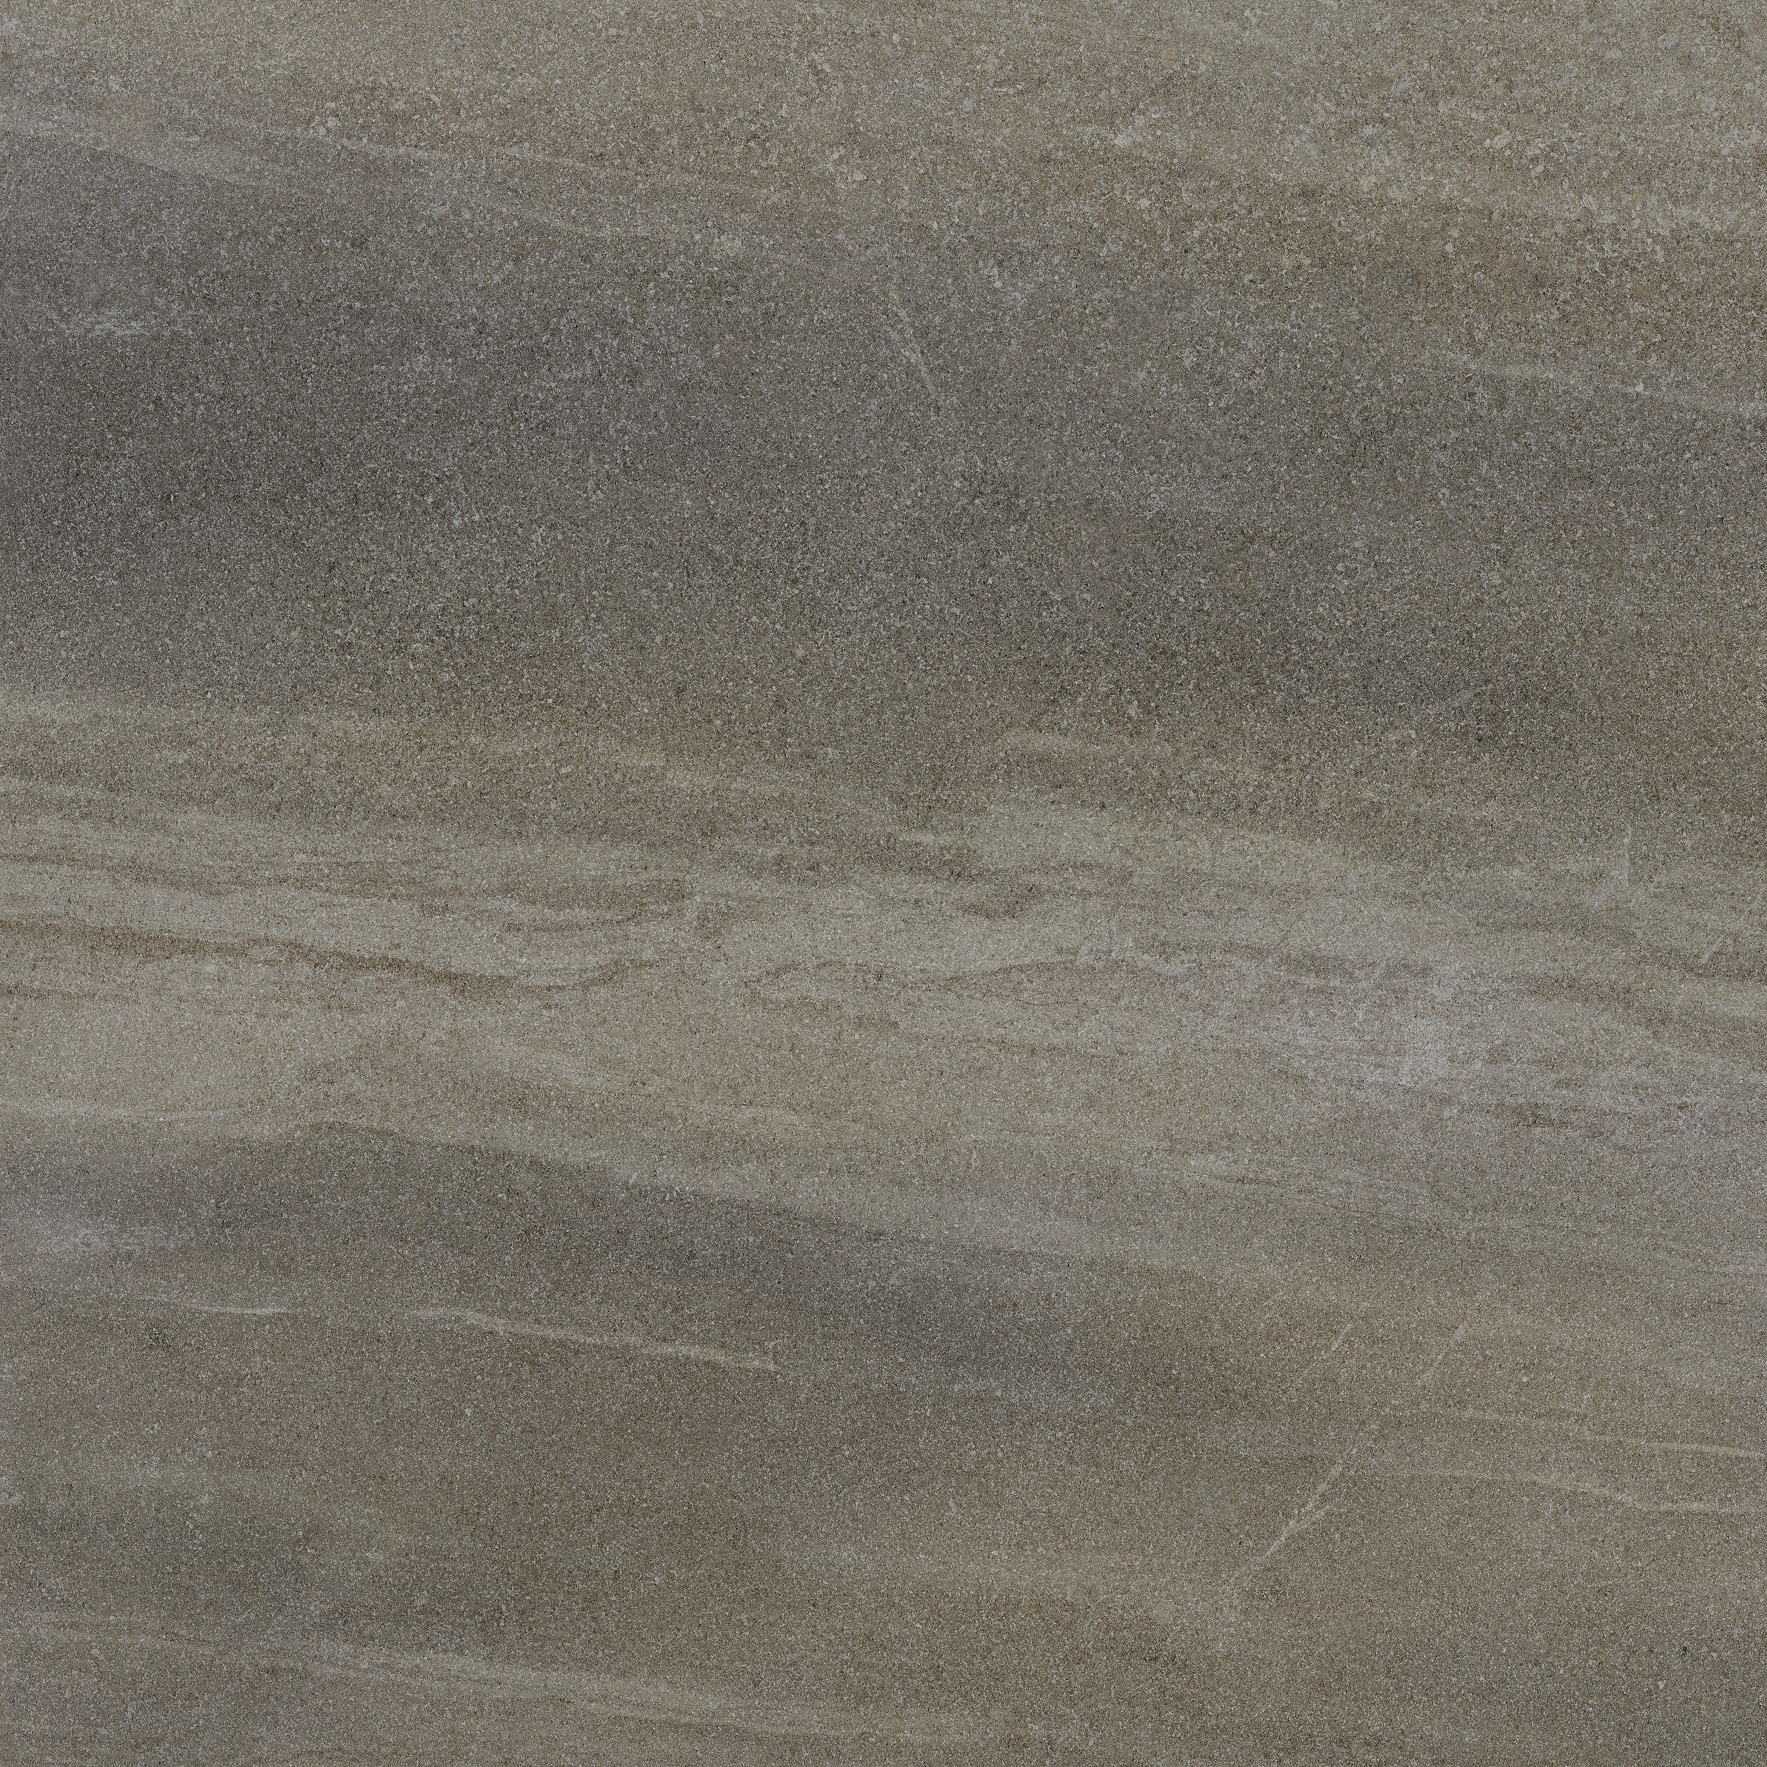 mica pattern glazed porcelain field tile from crux anatolia collection distributed by surface group international matte finish pressed edge 13x13 square shape